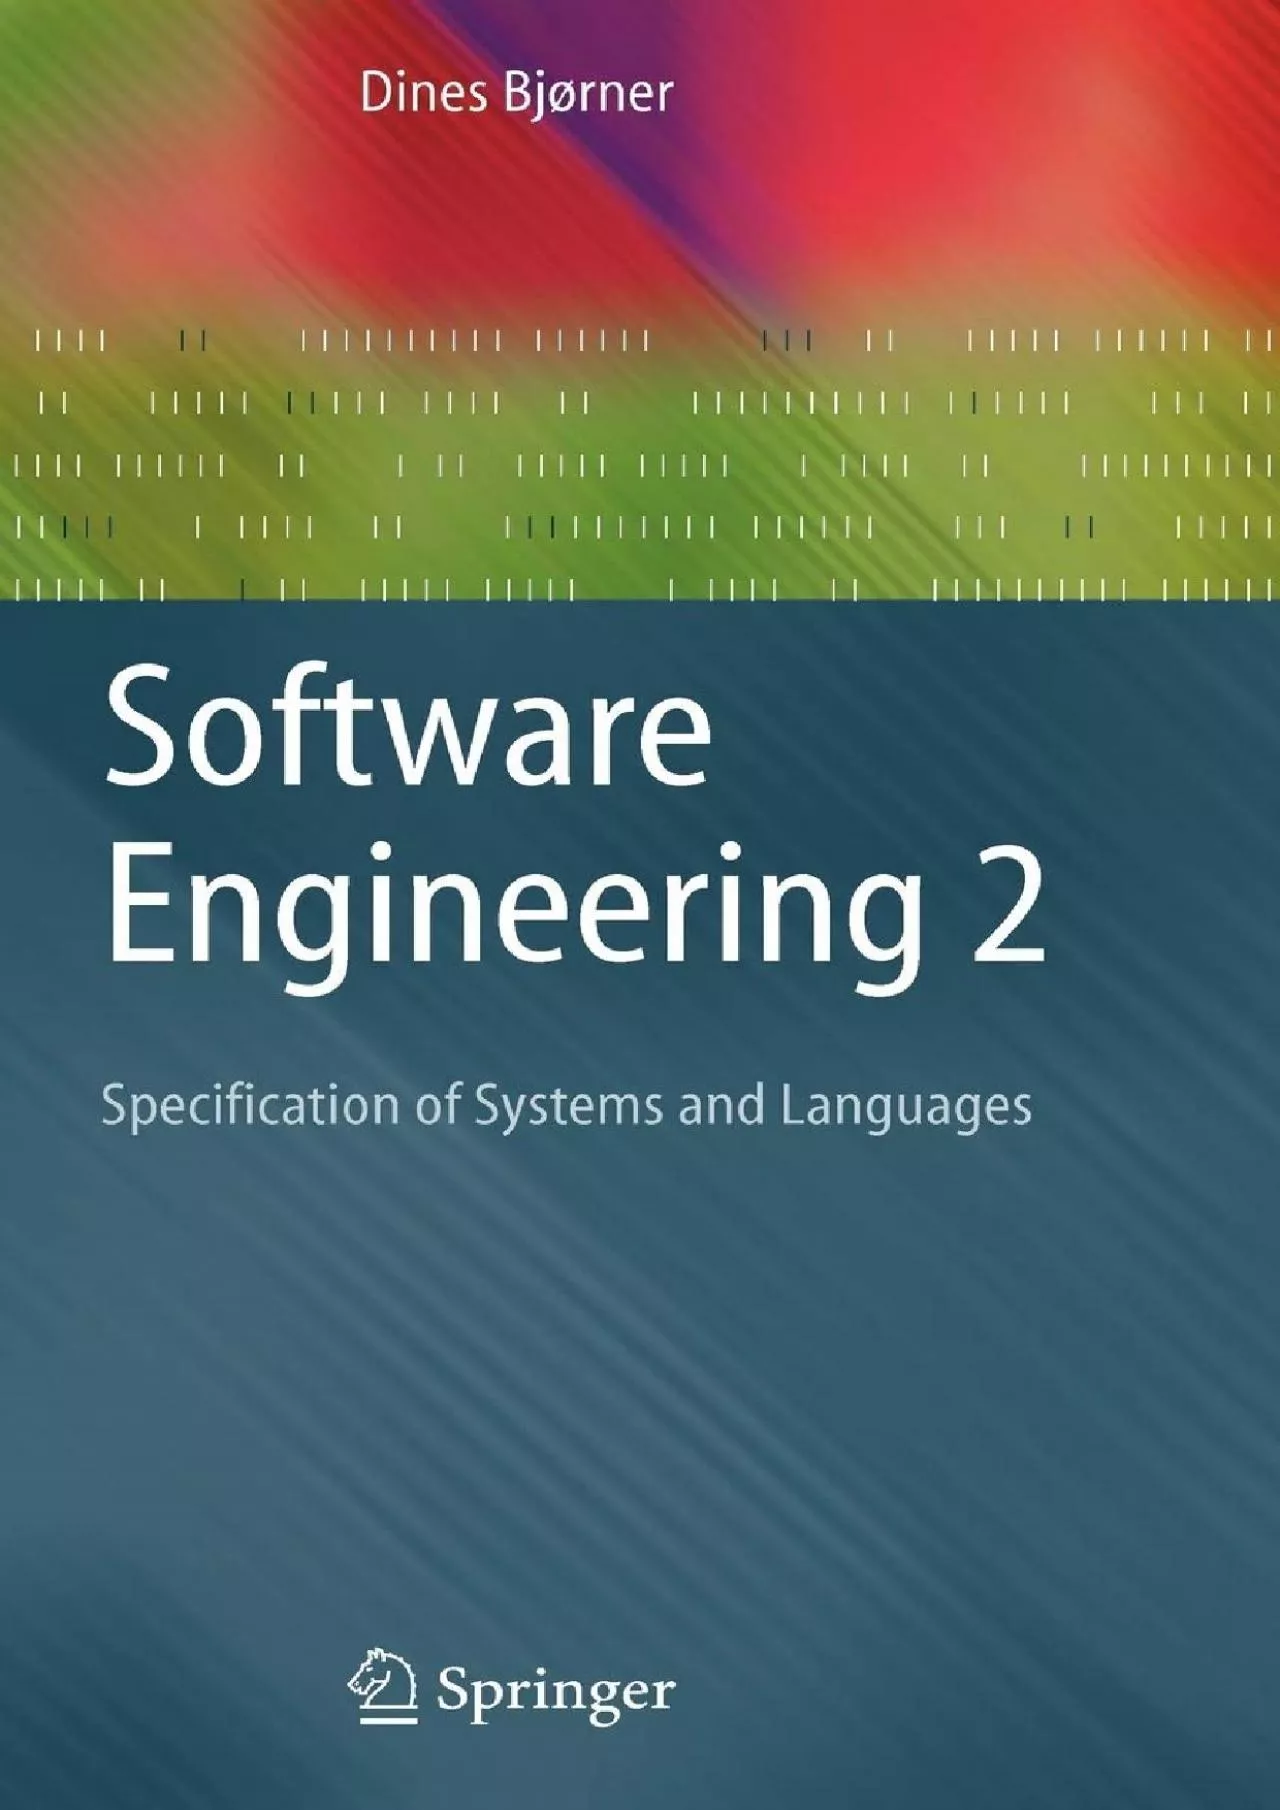 [BEST]-Software Engineering 2: Specification of Systems and Languages (Texts in Theoretical